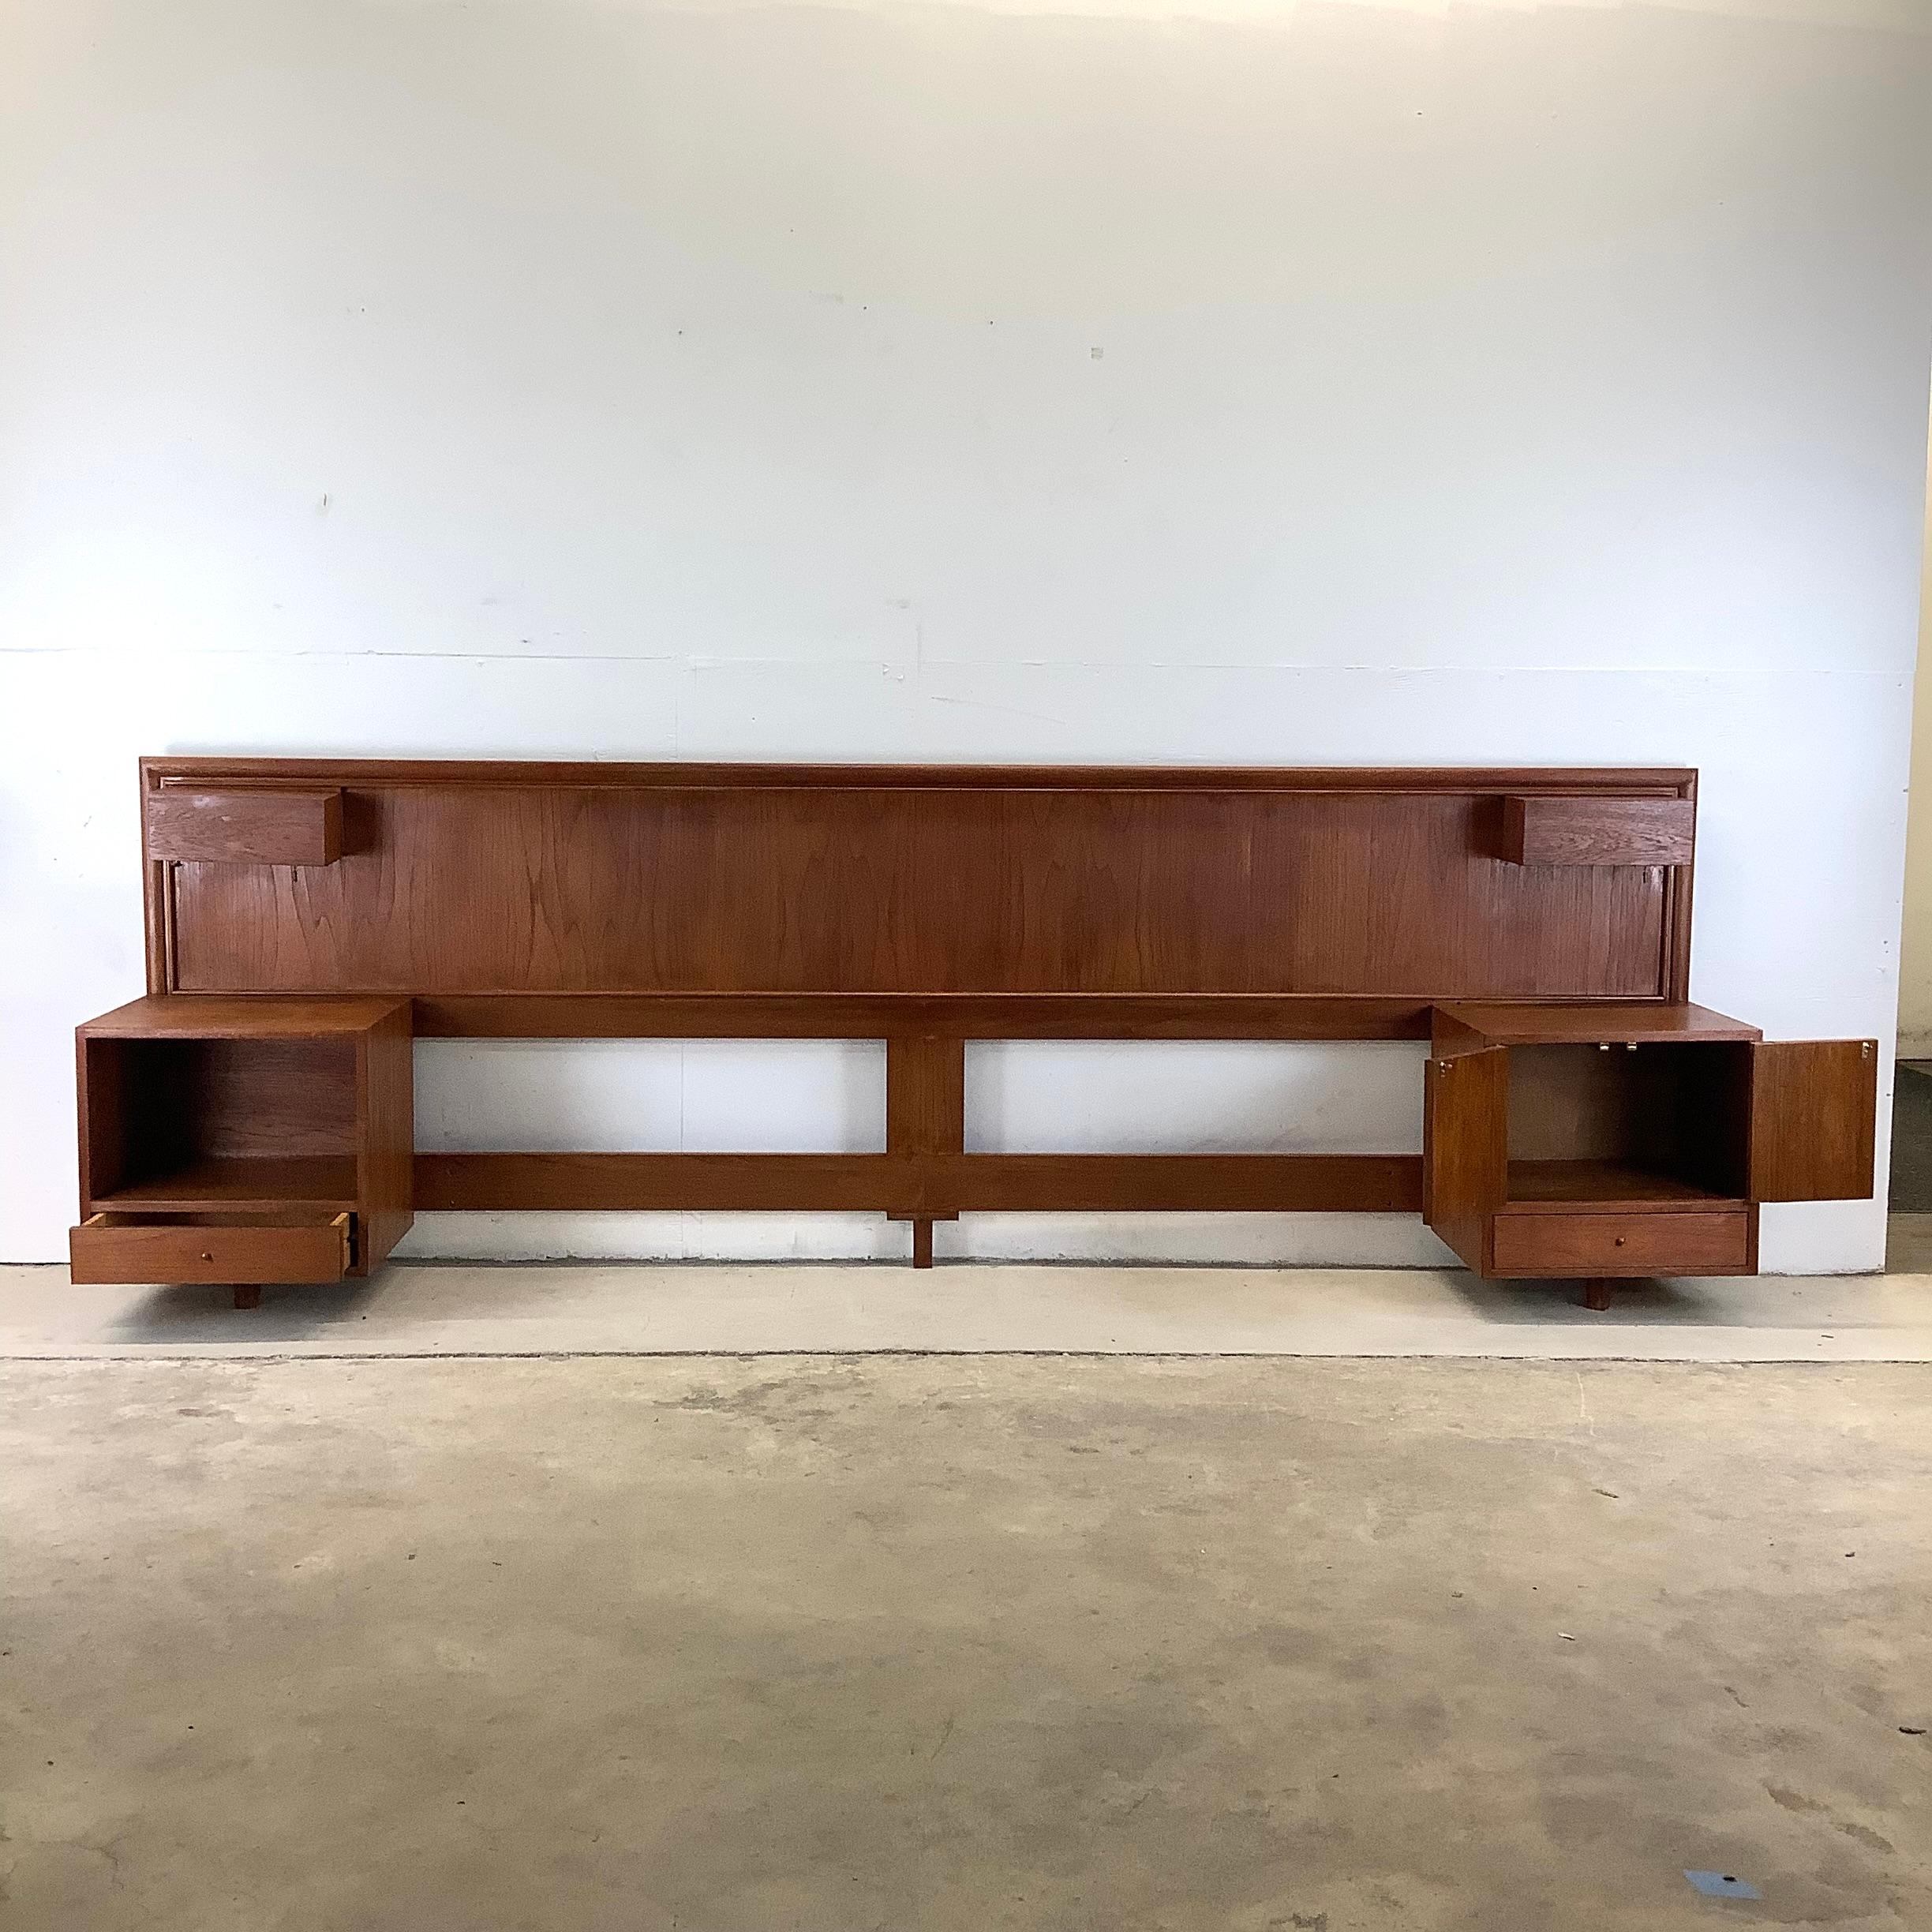 This unique Scandinavian Modern king size headboard with built-in nightstands features vintage teak construction and finish with clean mid-century modern style design. The dual bedside tables offer a combination of cabinet and drawer storage and